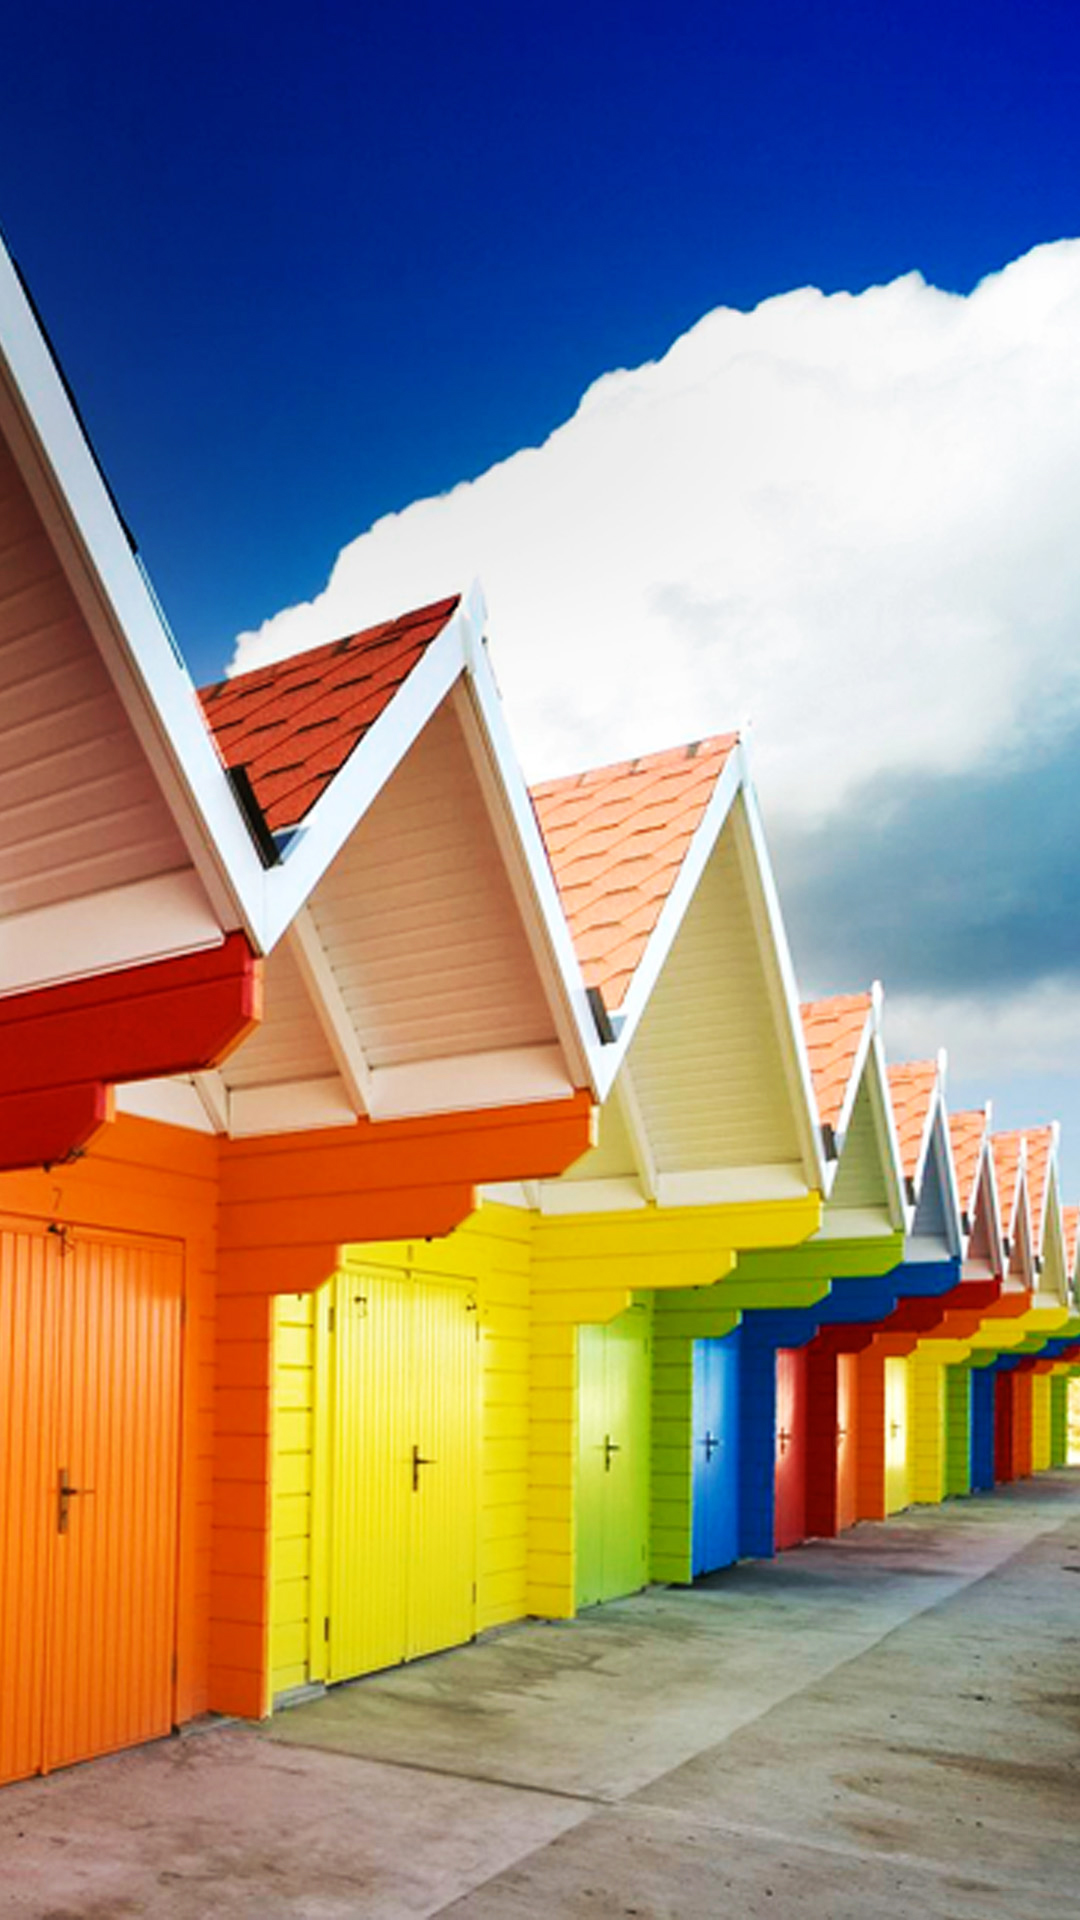 Multicolored Houses Lockscreen Android Wallpaper free download